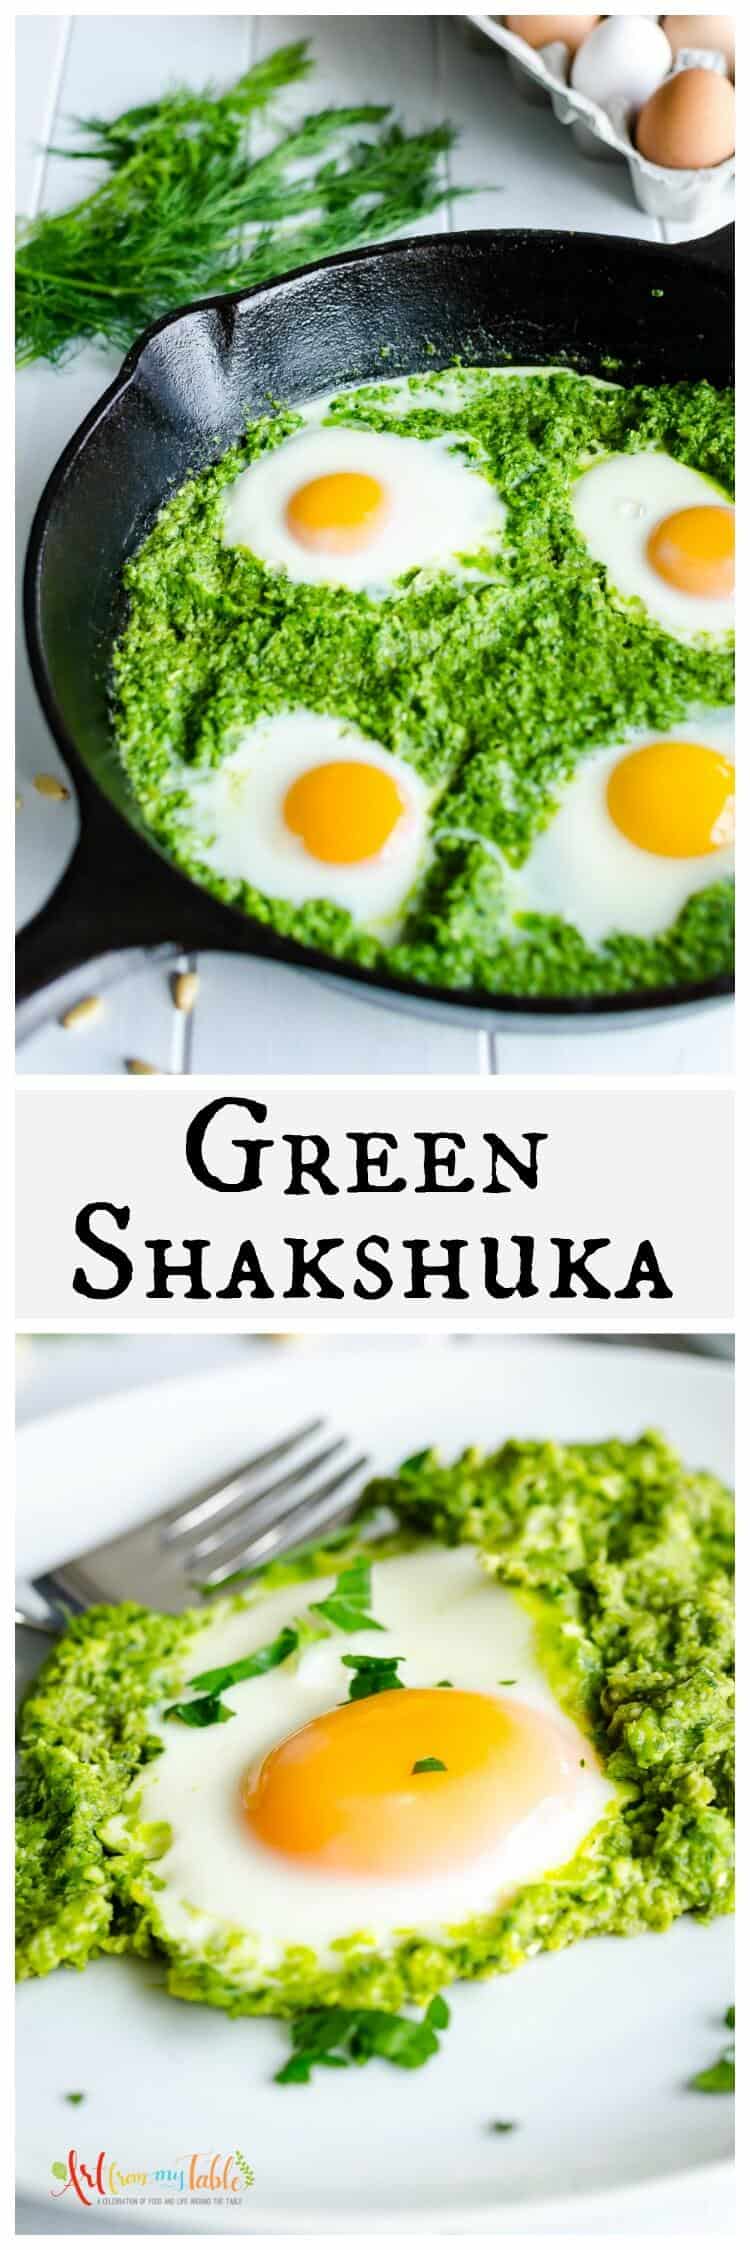 Creamy Green Shakshuka with peas, herbs and spices | Art From My Table